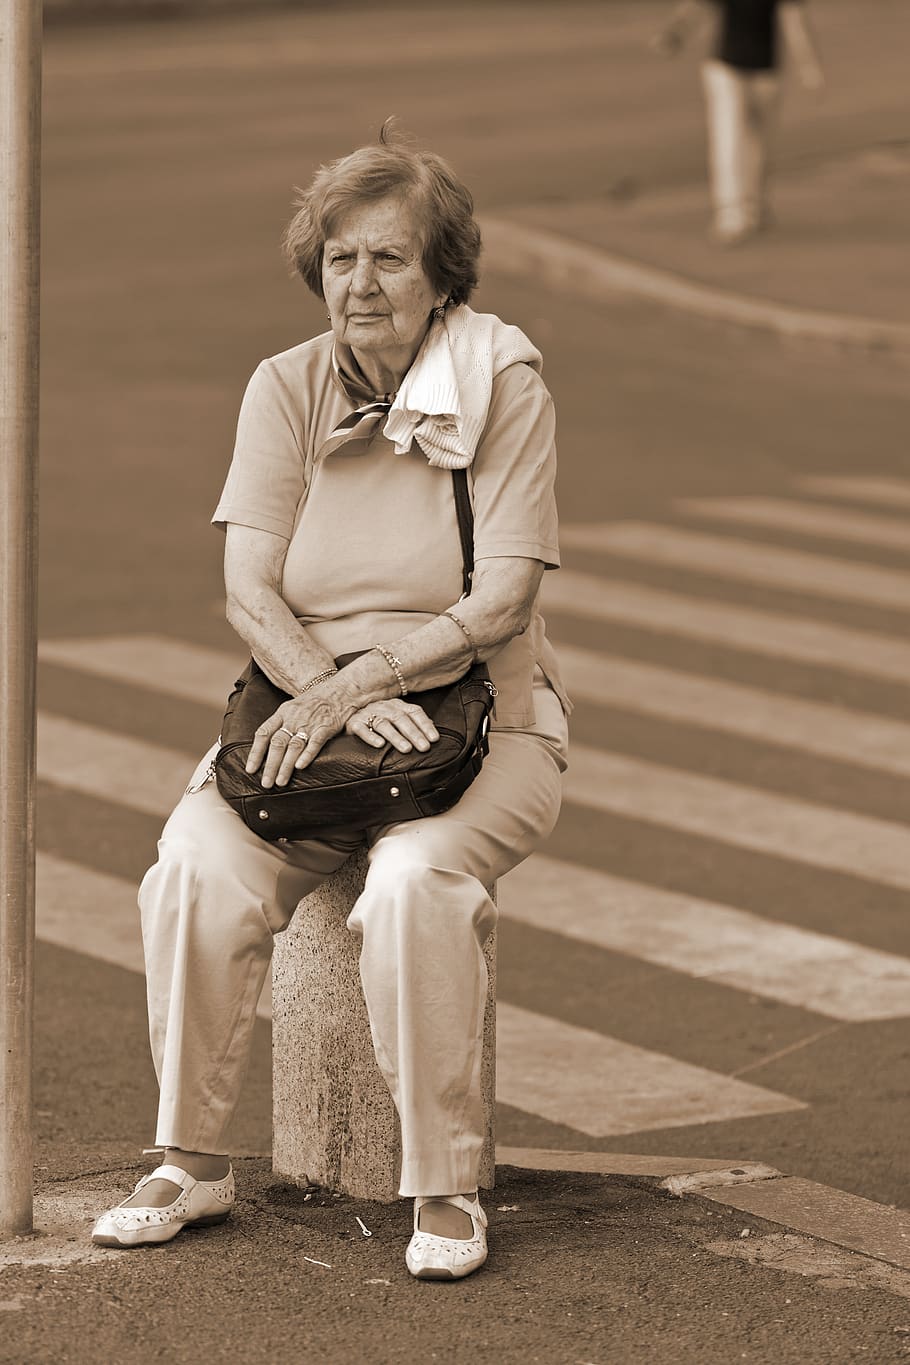 woman, old, man, person, bag, waiting for, seated, street, intersection, pedestrian crossing